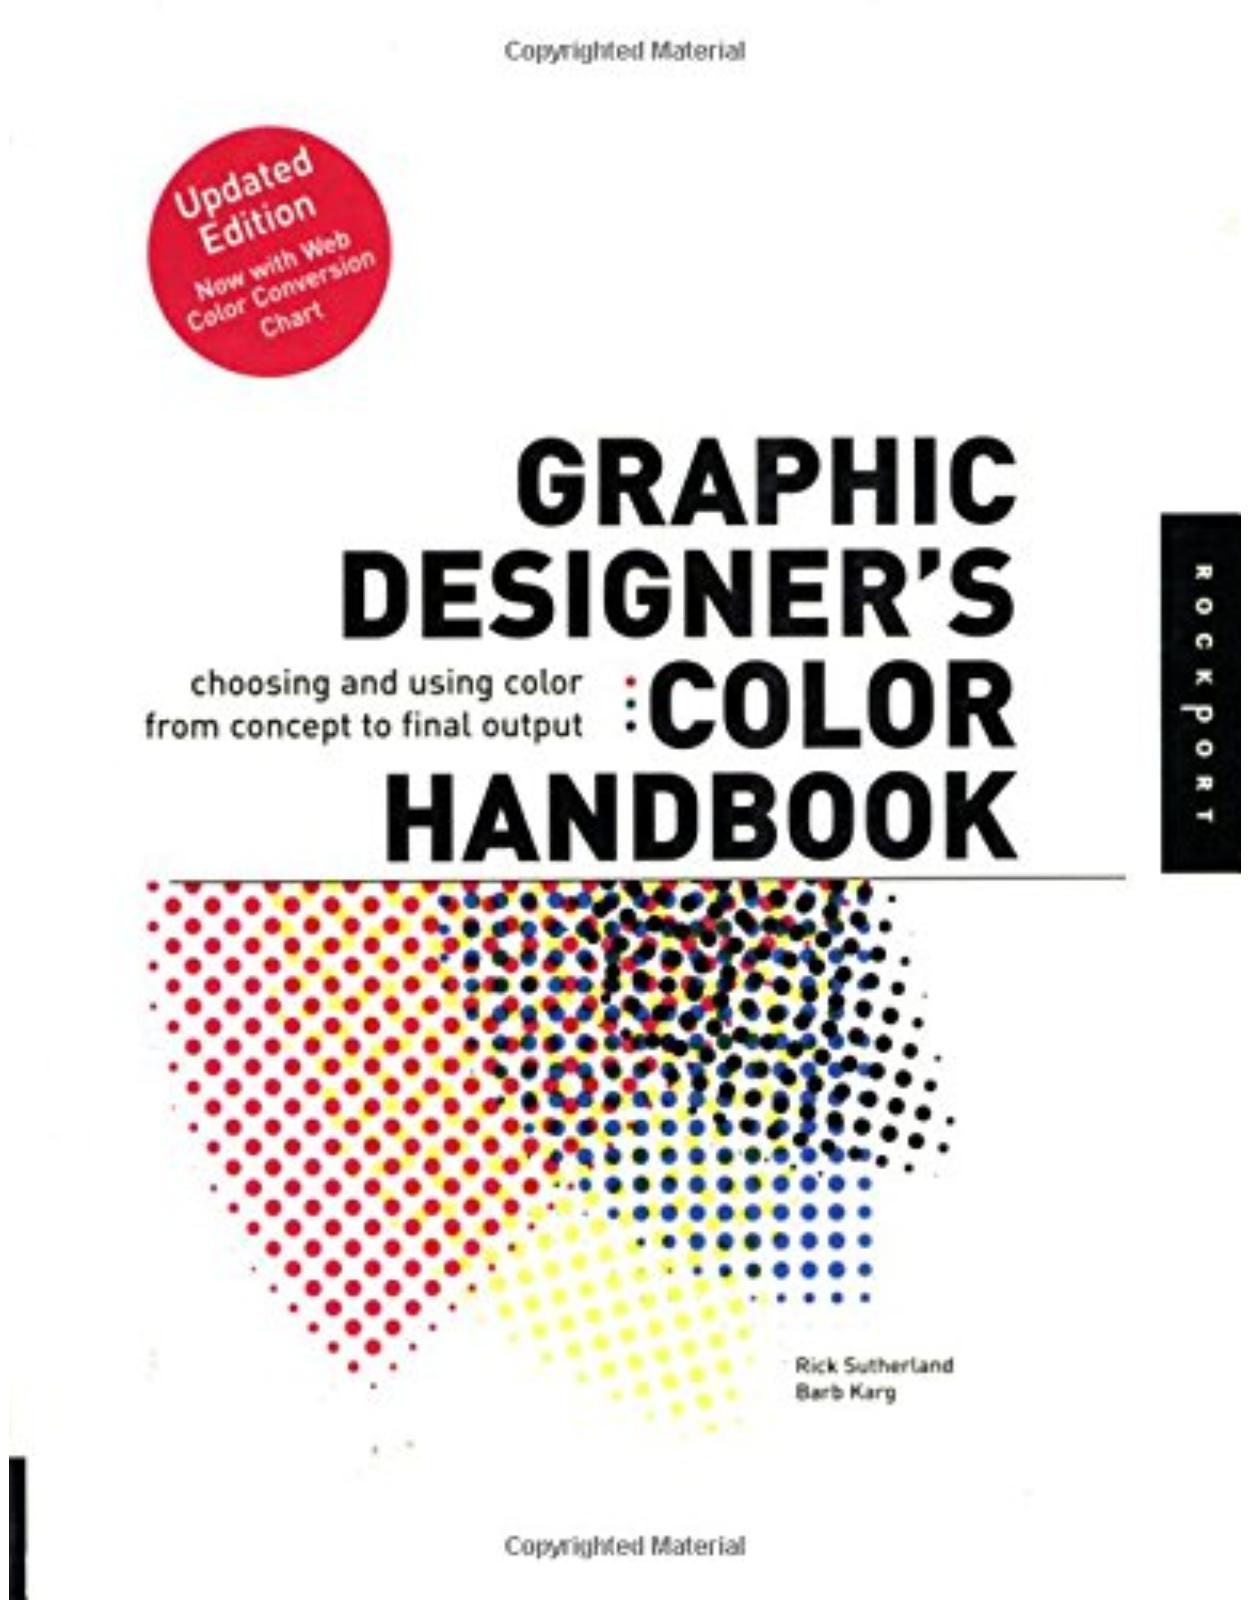 Graphic designer's color handbook : choosing and using color from concept to final output